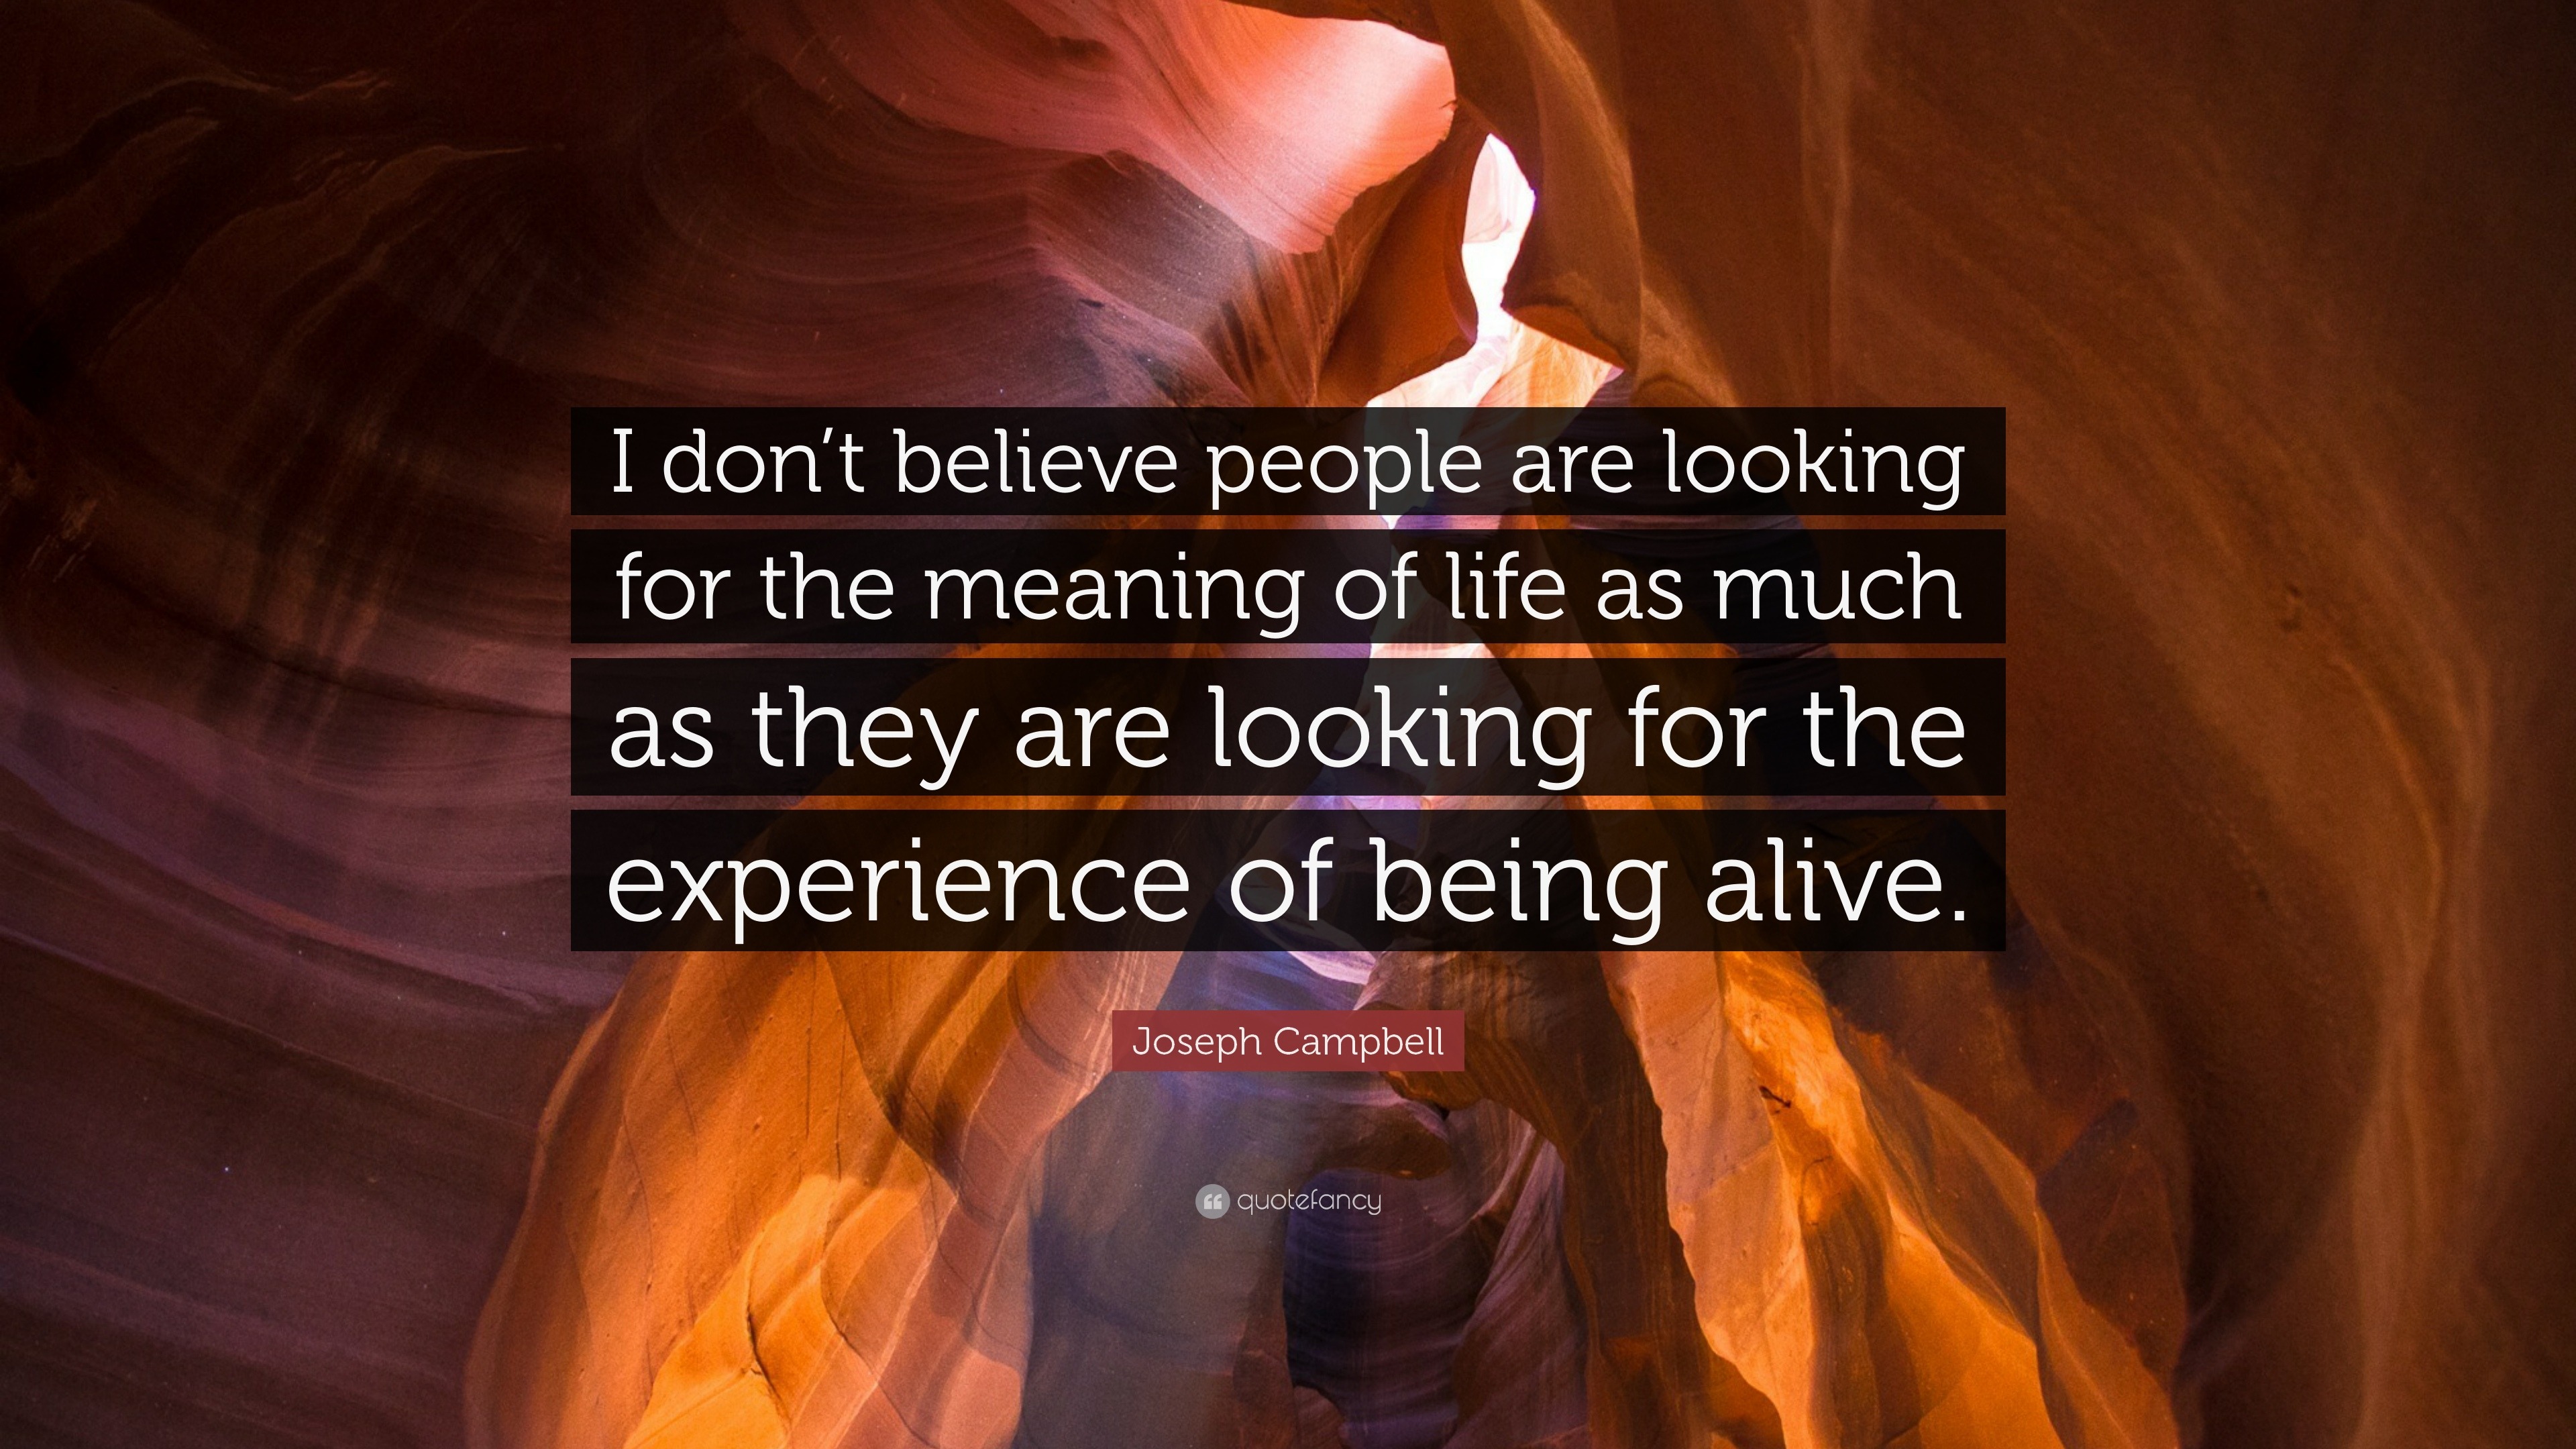 34199 Joseph Campbell Quote I don t believe people are looking for the